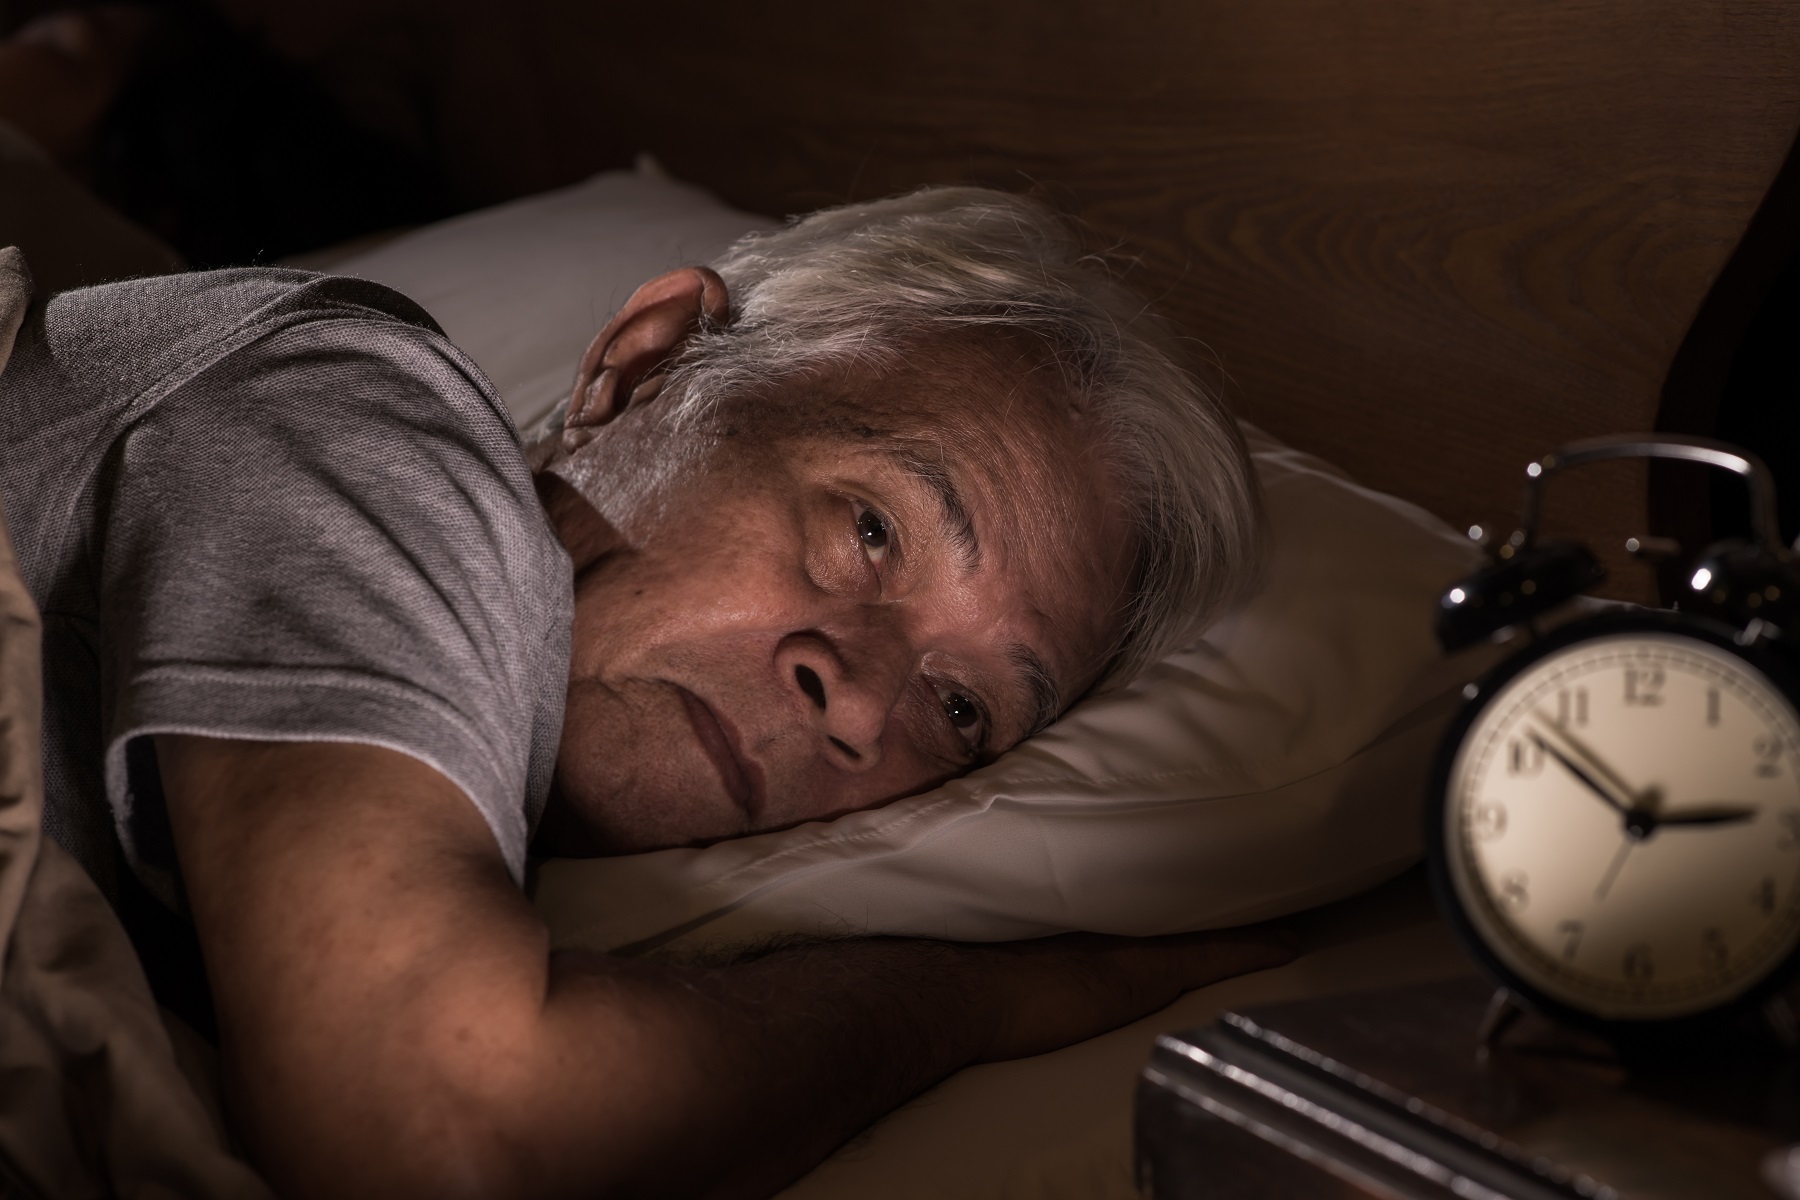 What causes sleep disorders in older adults?